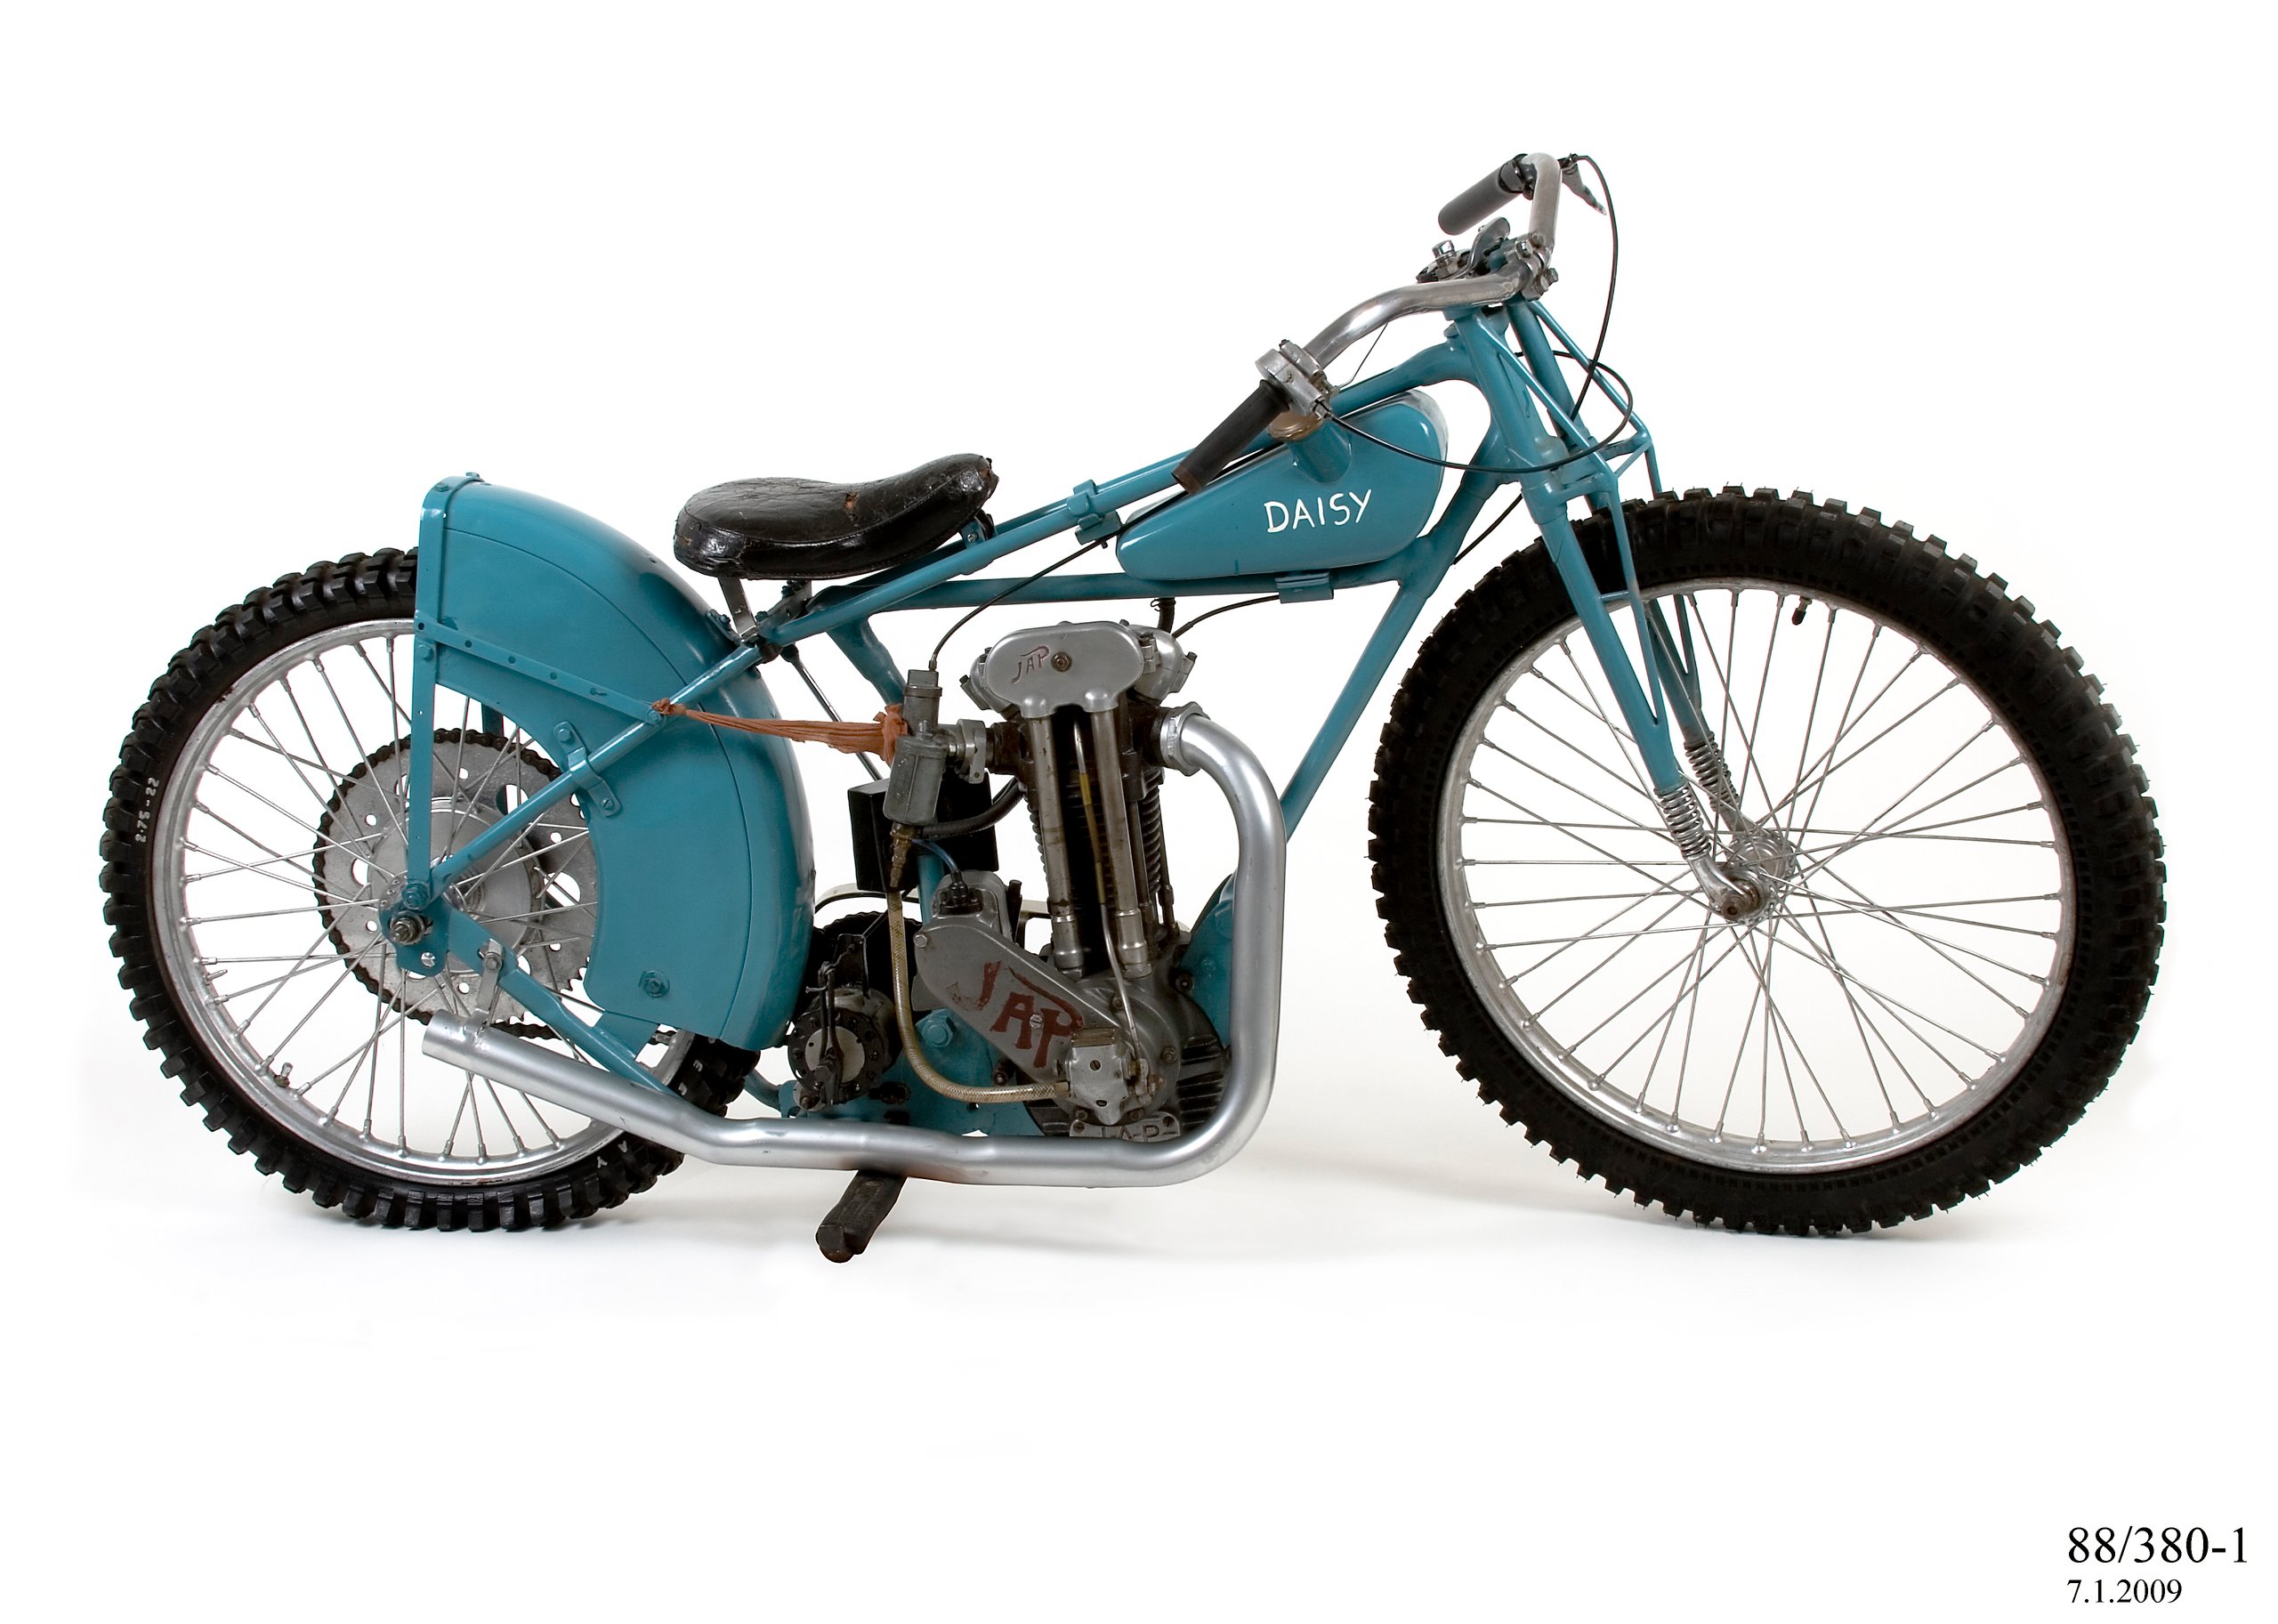 Ray Taylor's speedway motorcycle "Daisy" by Martin/JAP